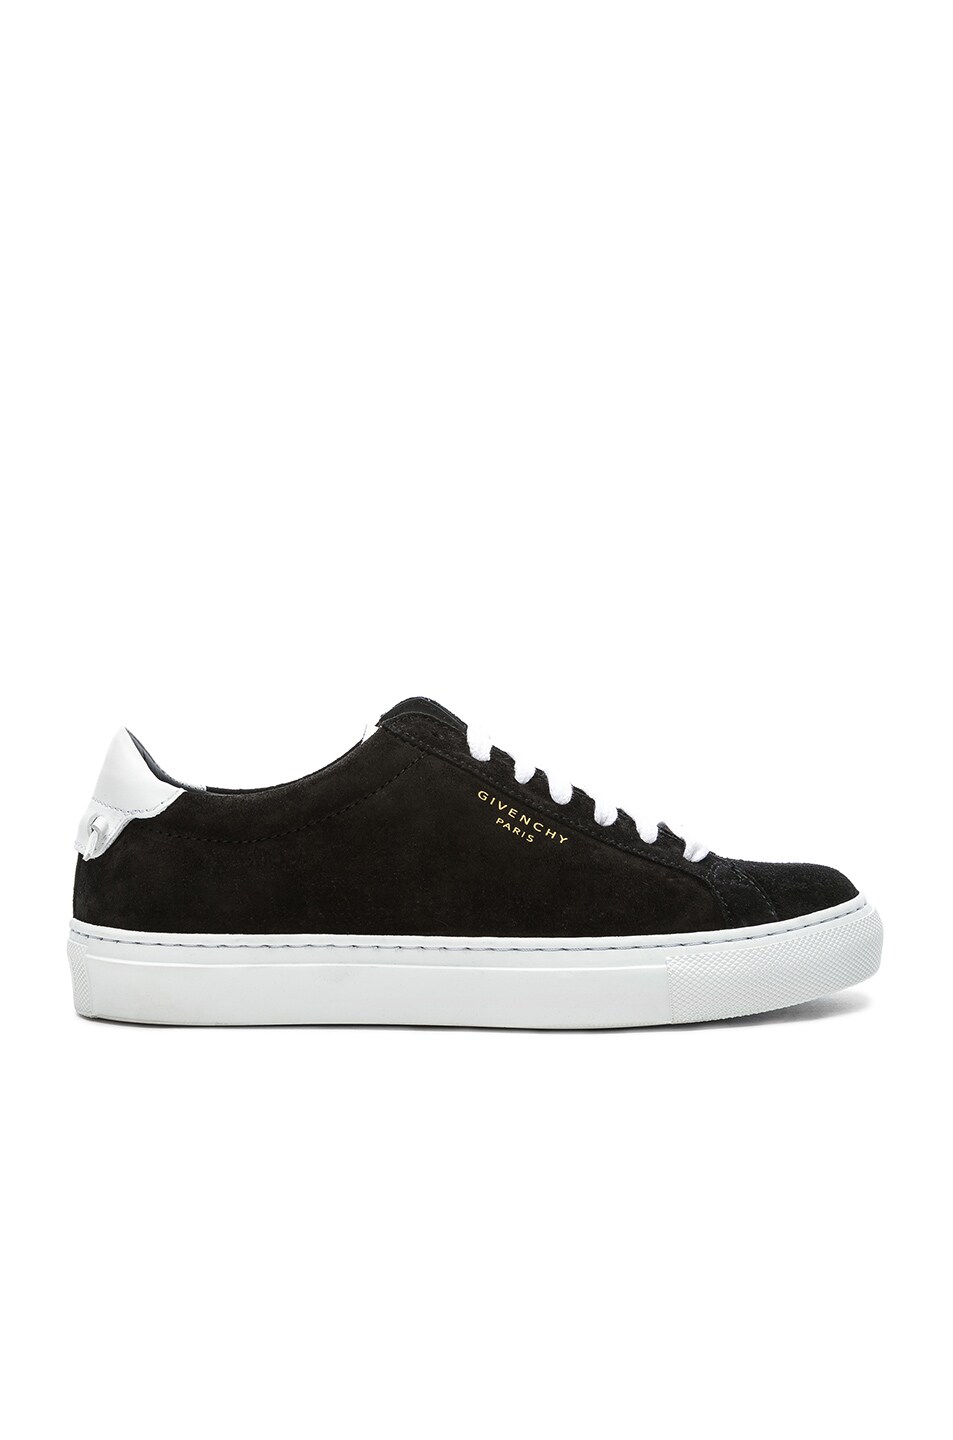 Image 1 of Givenchy Urban Tie Knot Suede & Leather Sneakers in Black & White